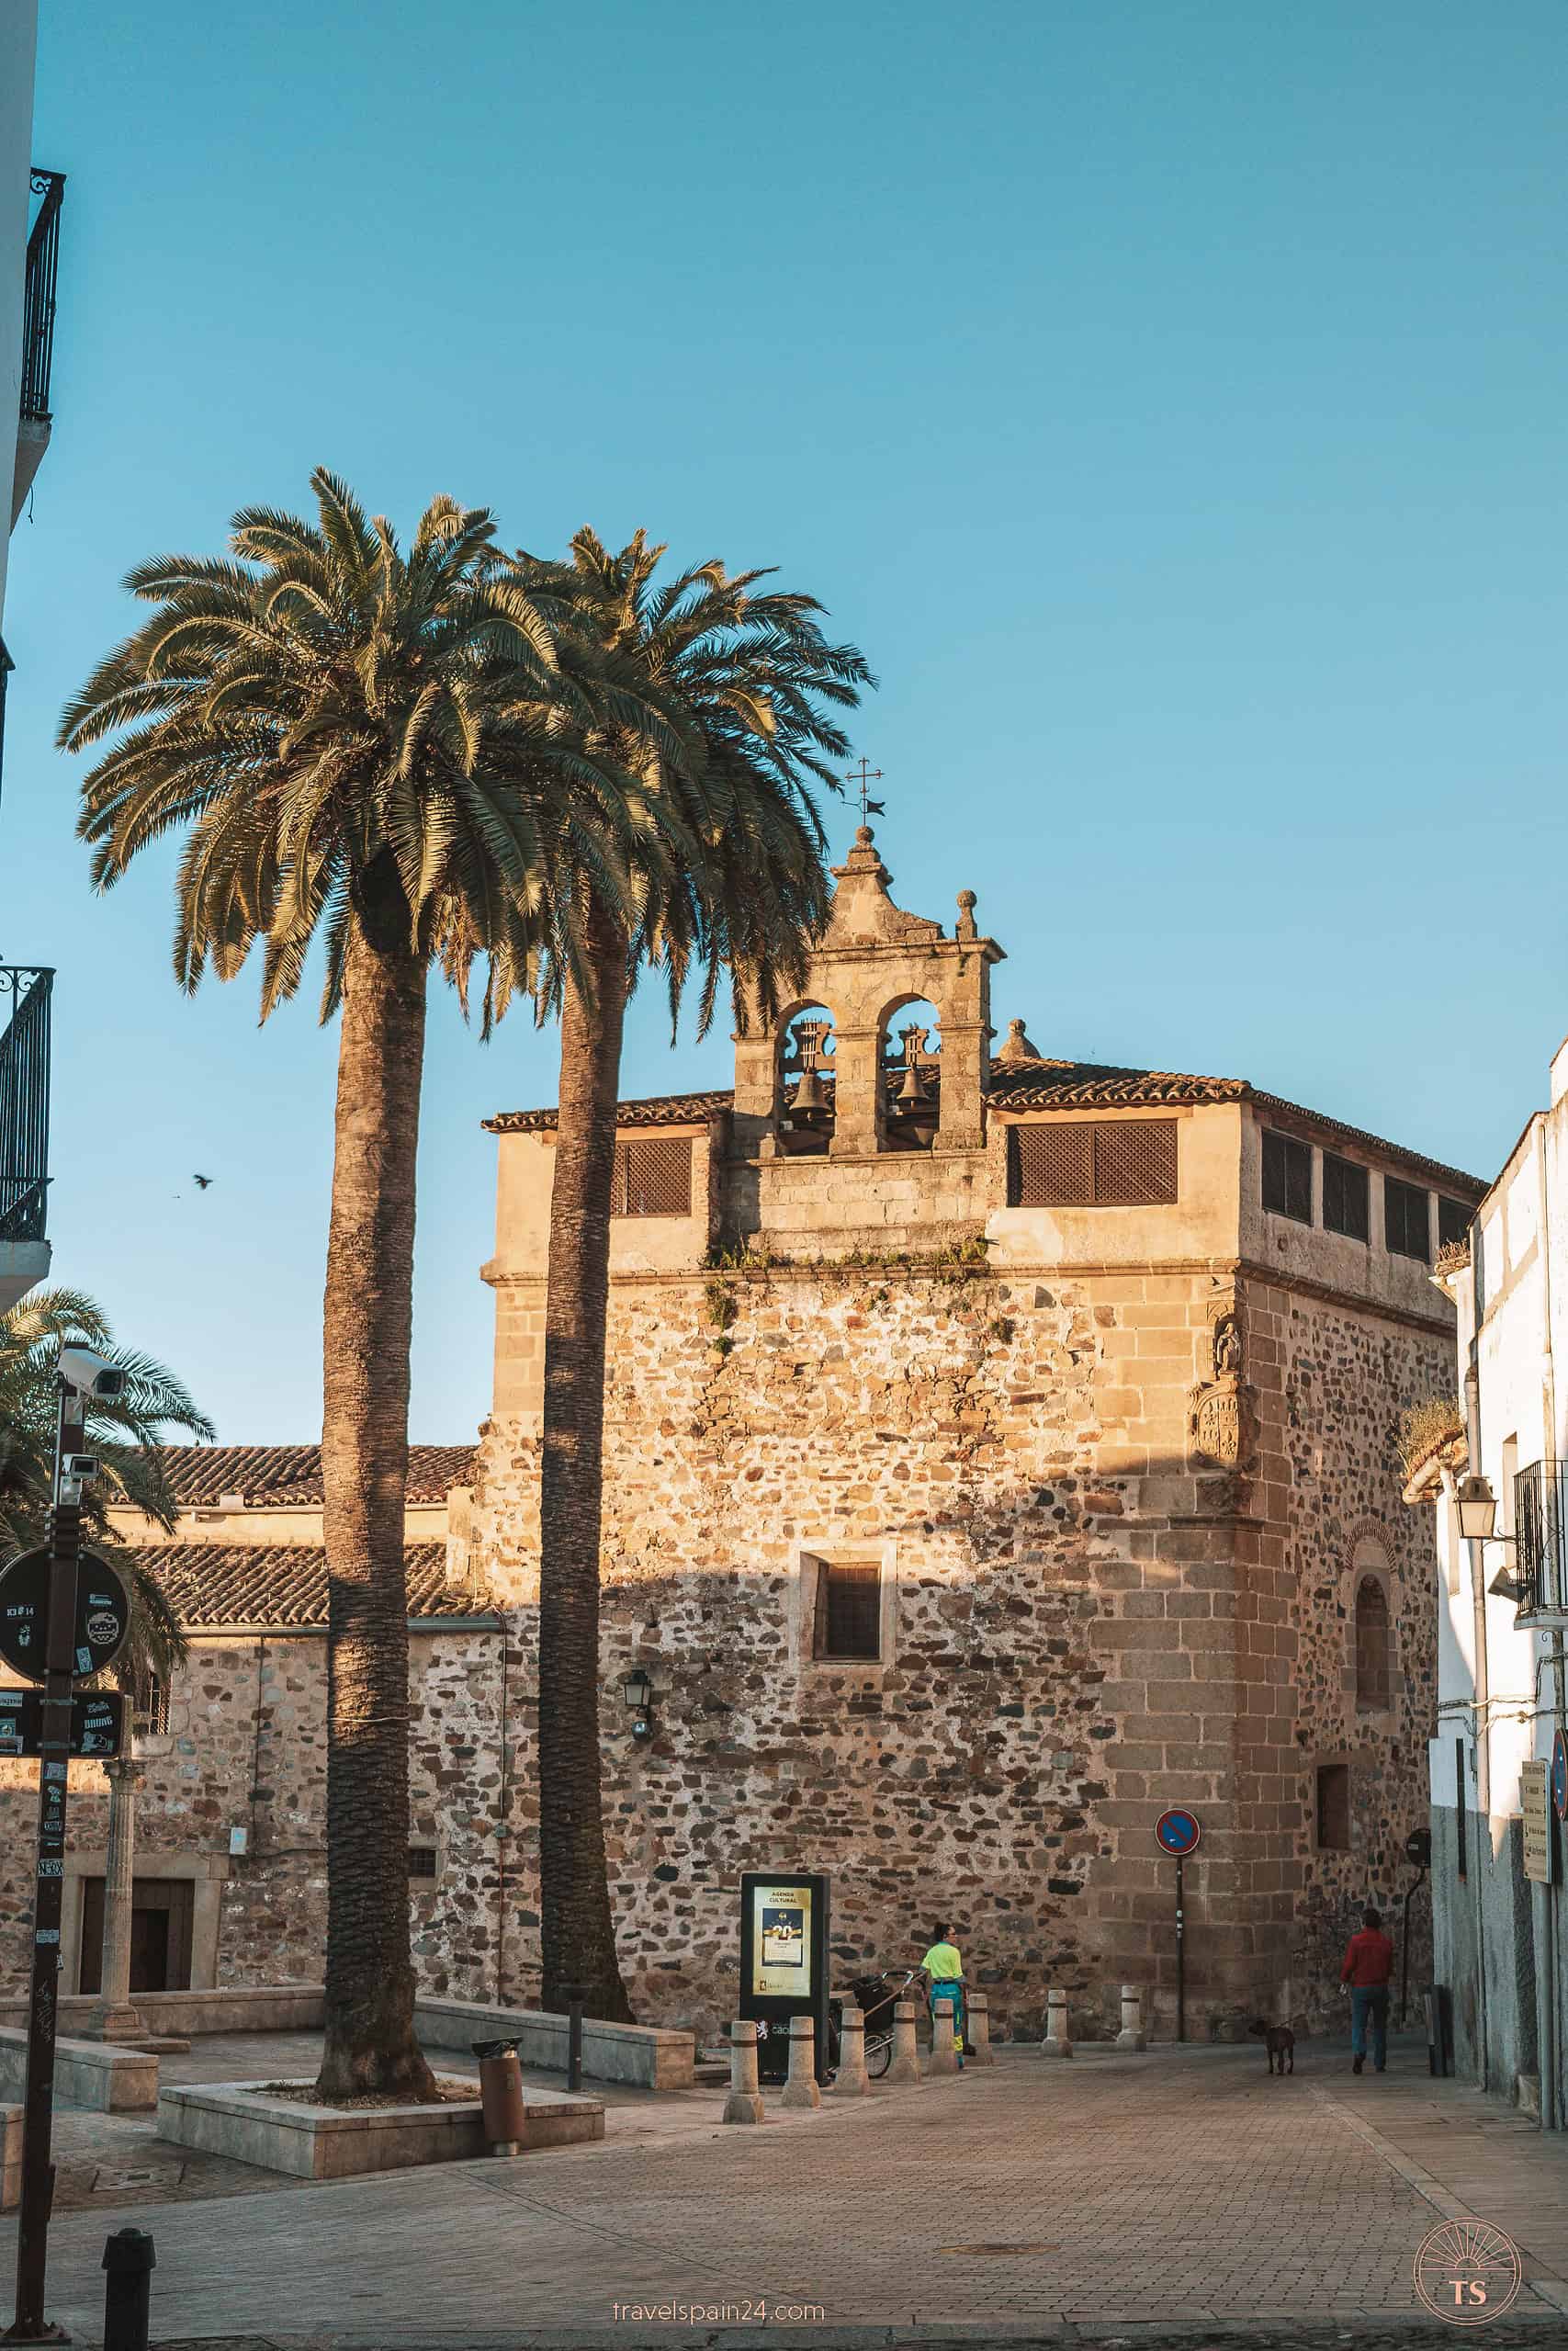 The serene Convent of Santa Clara located in the quiet Plaza de Santa Clara in Cáceres, a peaceful retreat within the bustling city.